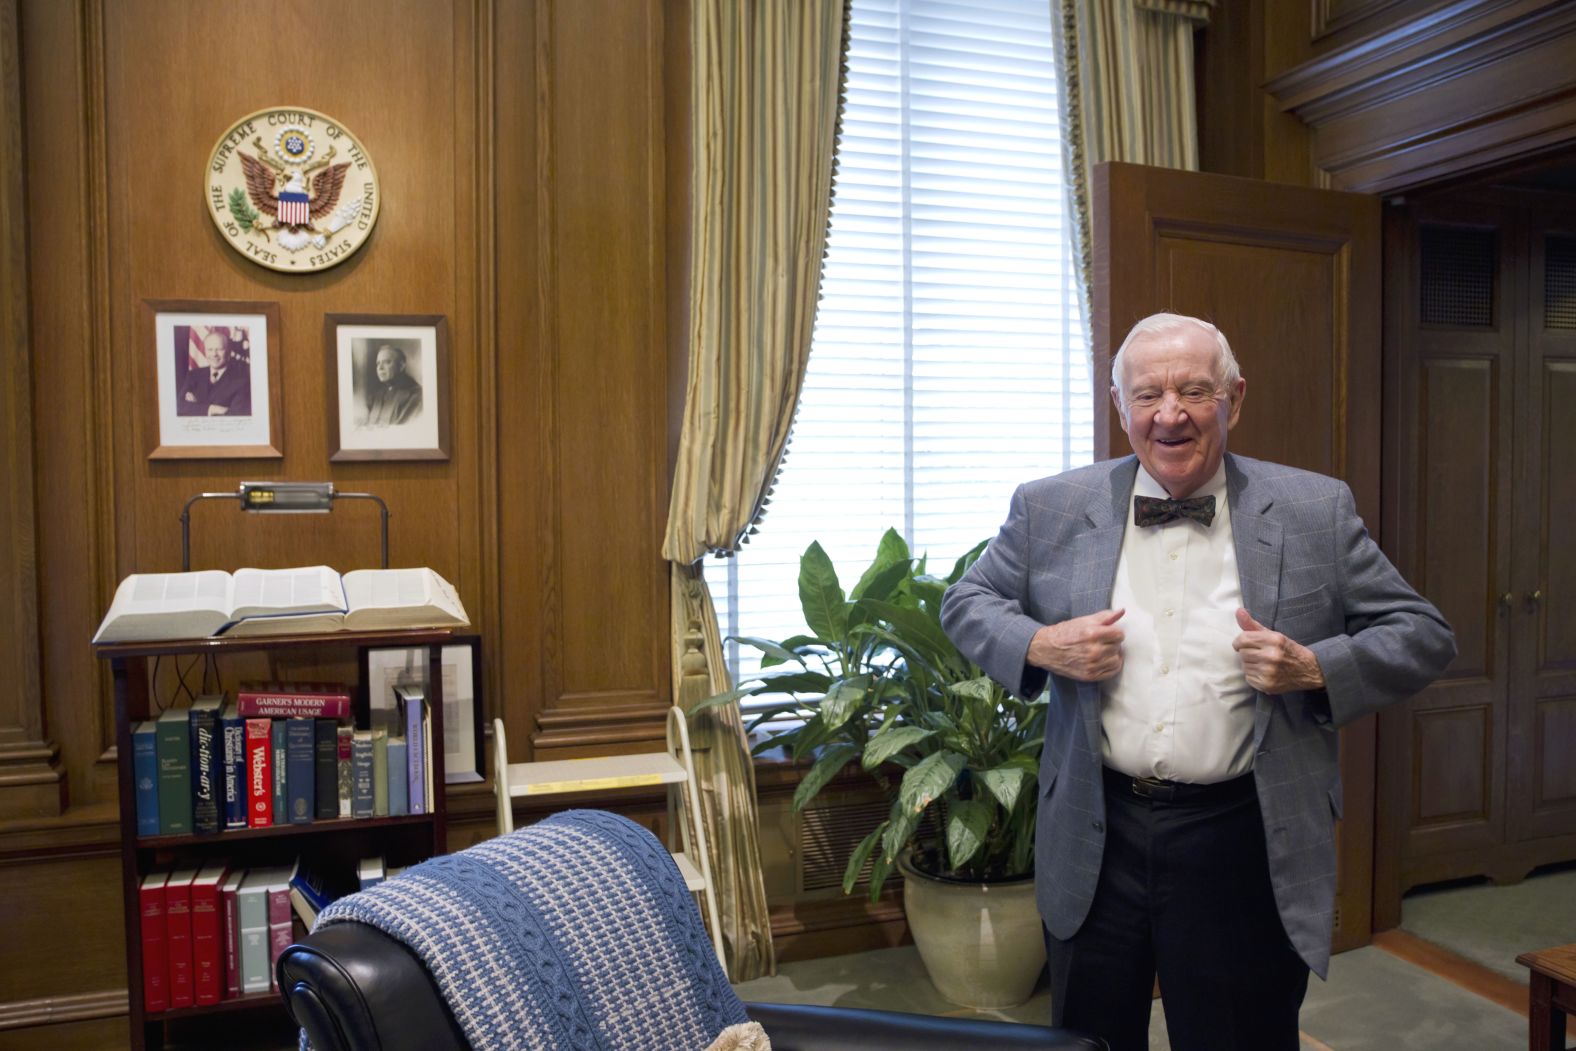 Stevens works in his office at the Supreme Court on September 28, 2011, after the release of his book "Five Chiefs: A Supreme Court Memoir," a personal reflection on the five chief justices he has known.